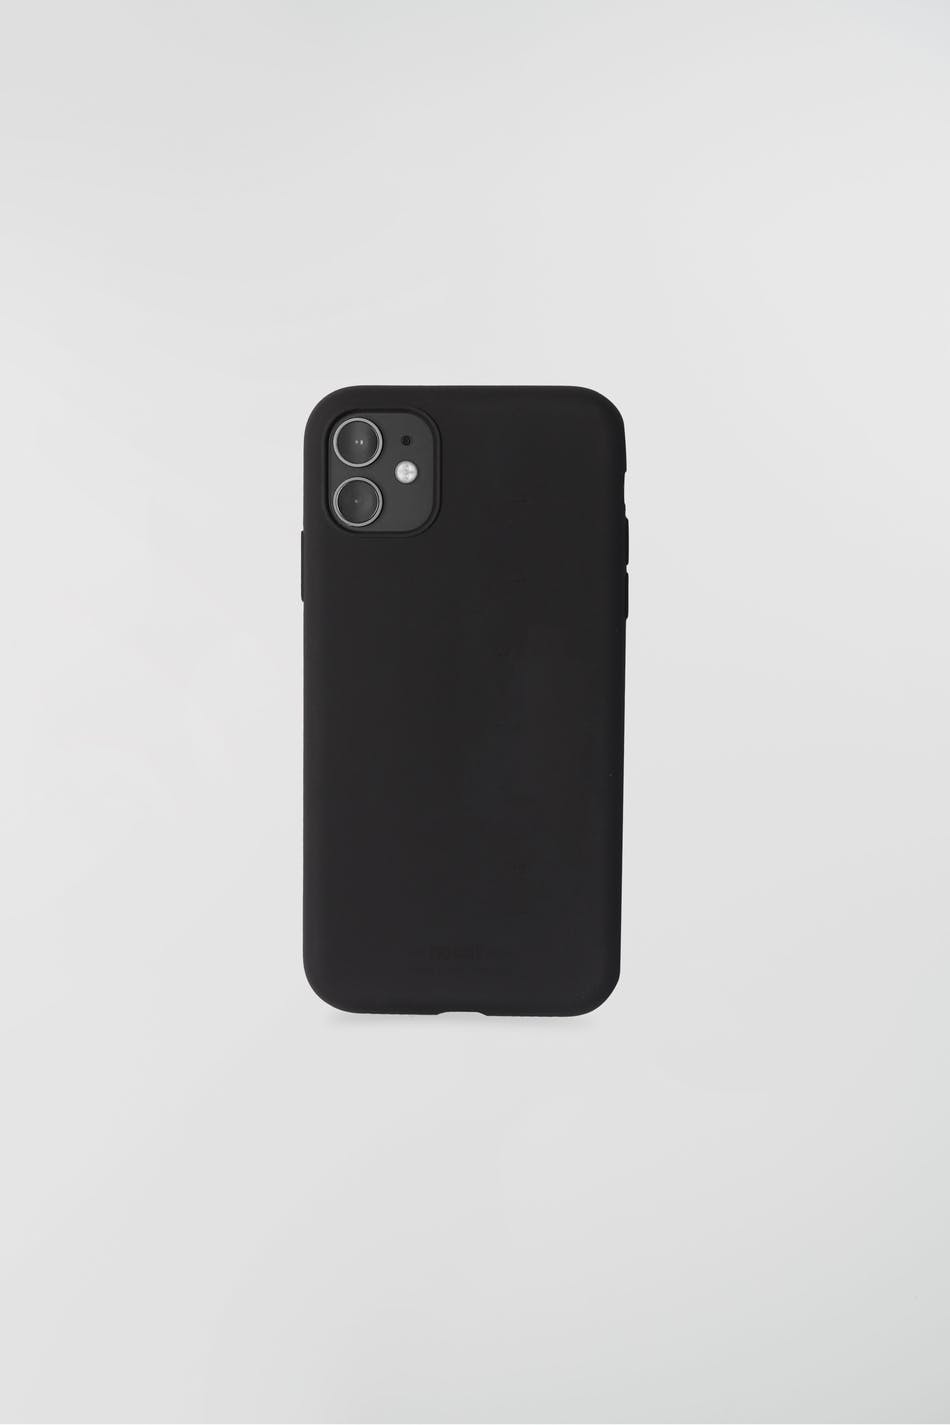 Holdit Iphone 11 Pro Silicone Case Colab Gina Tricot